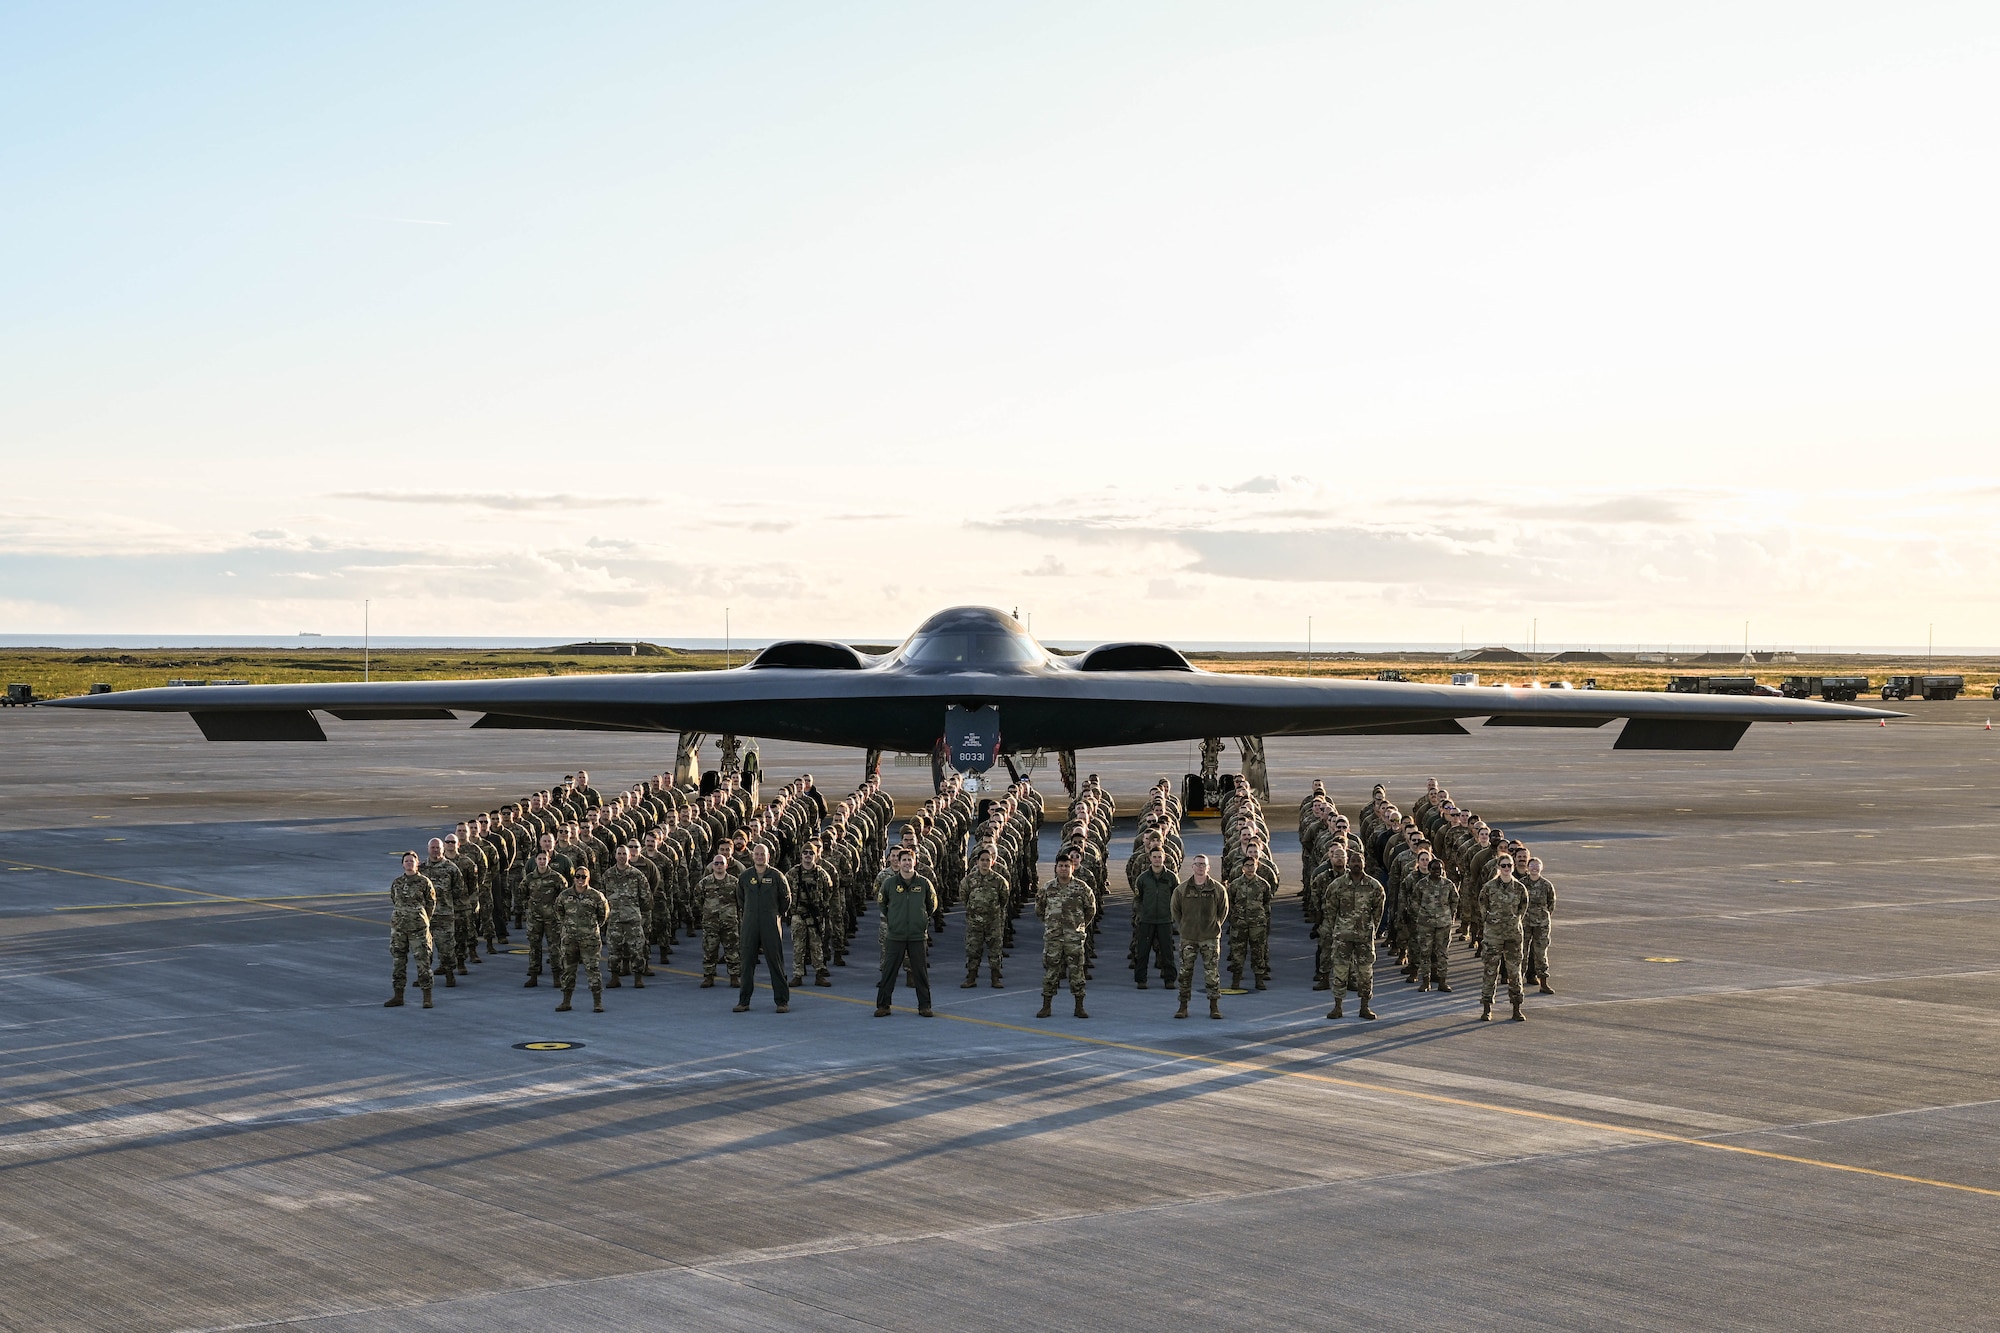 A group of Airmen standing in front of a B2 bomber aircraft